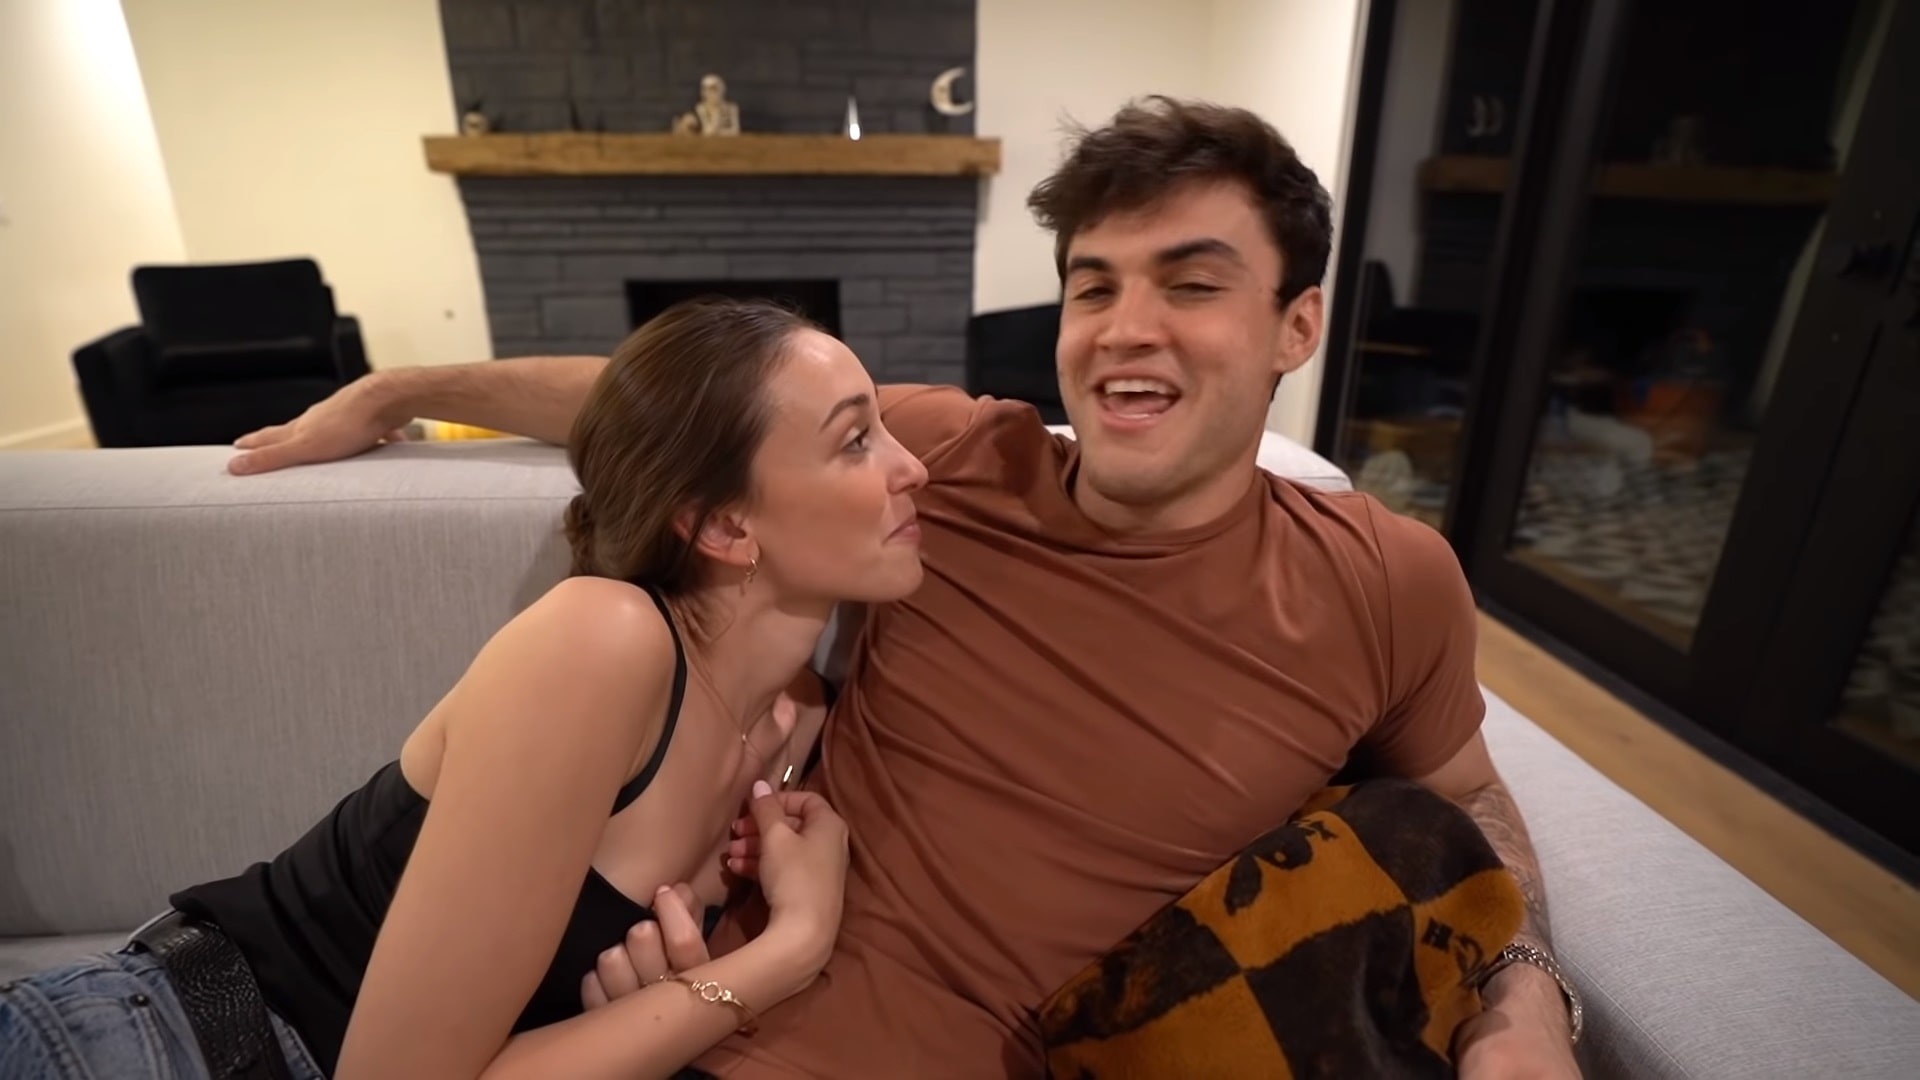 Ethan's wearing brown tee and kristina's wearing black top.